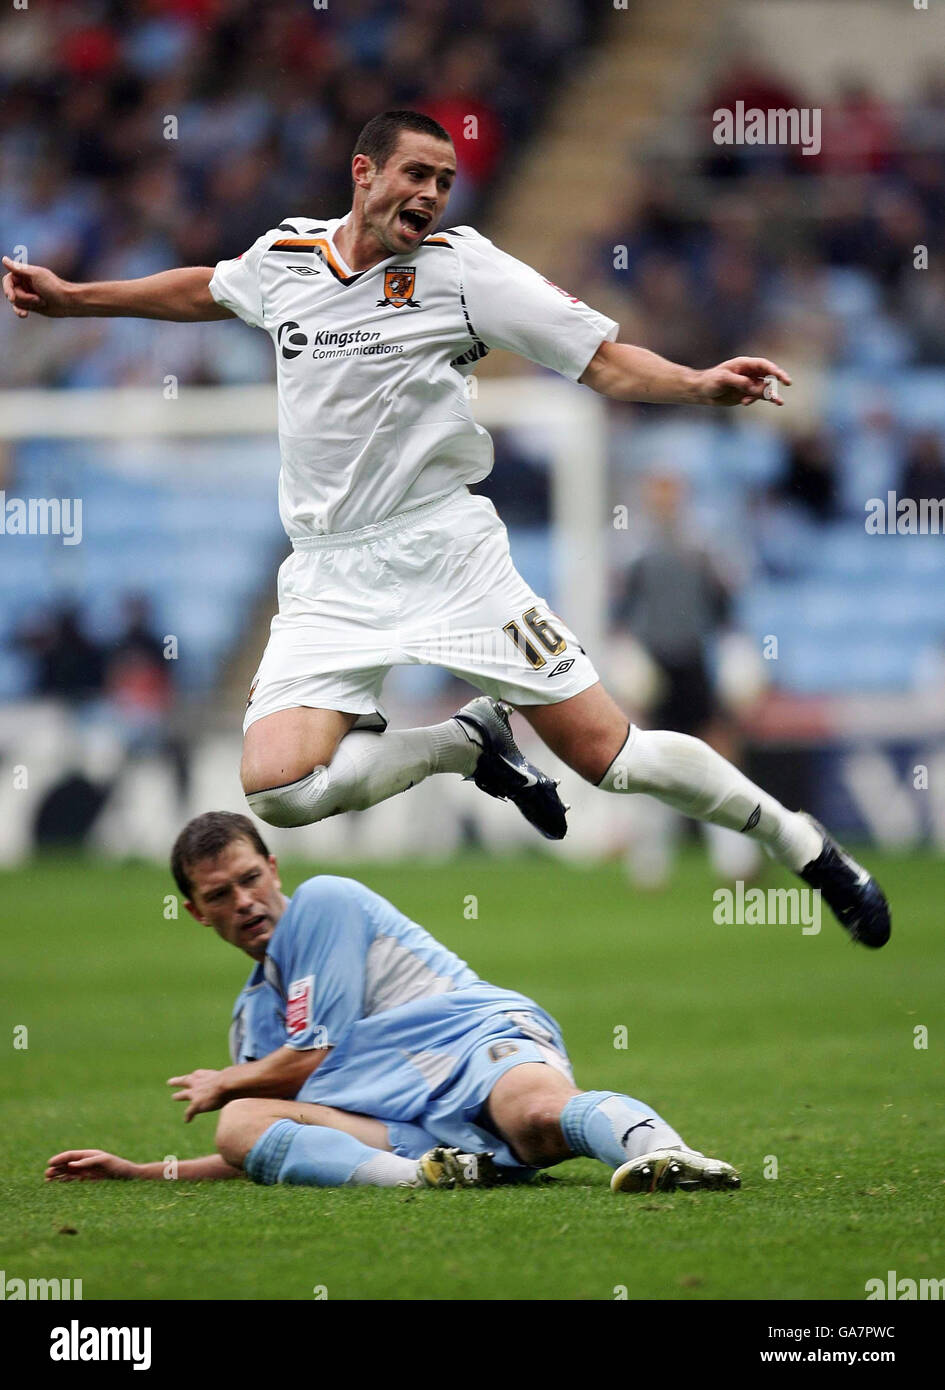 Hull's Damien Delaney clears a challenge from Coventry's Stephen Hughes during the Coca-Cola Football League Championship match at Ricoh Arena, Coventry. Stock Photo